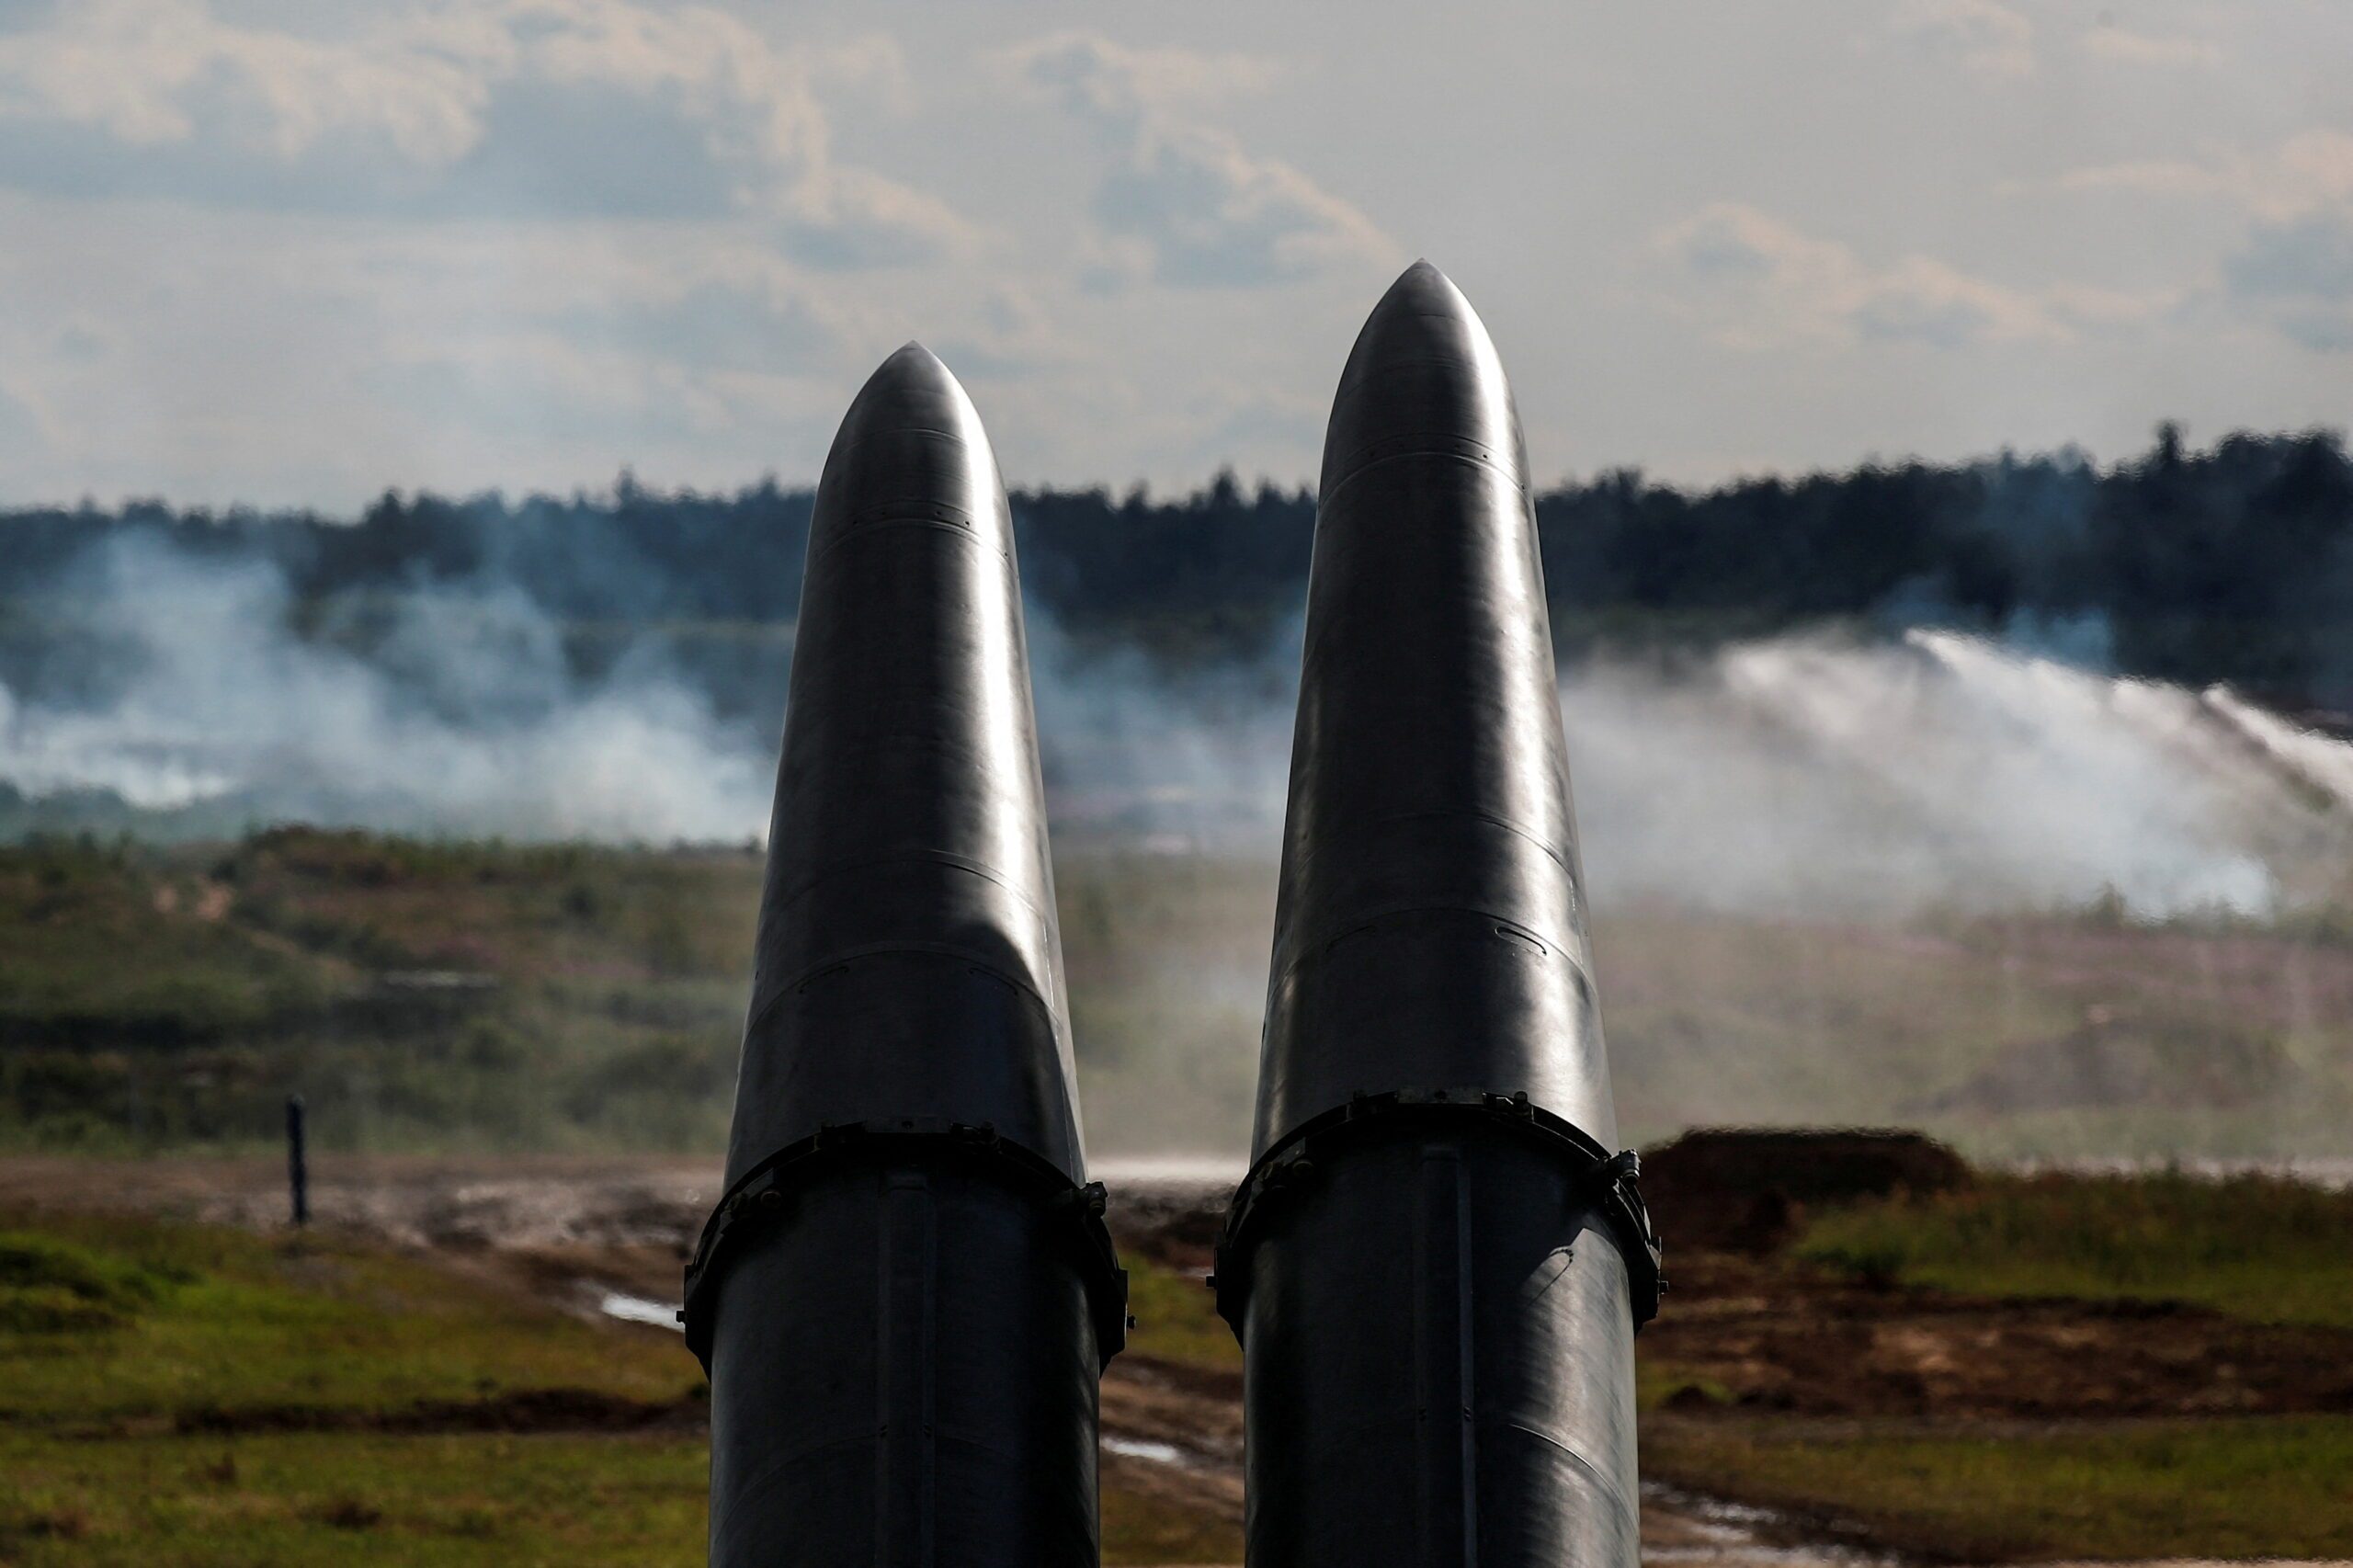 Russian missiles strike several Ukrainian cities – local officials